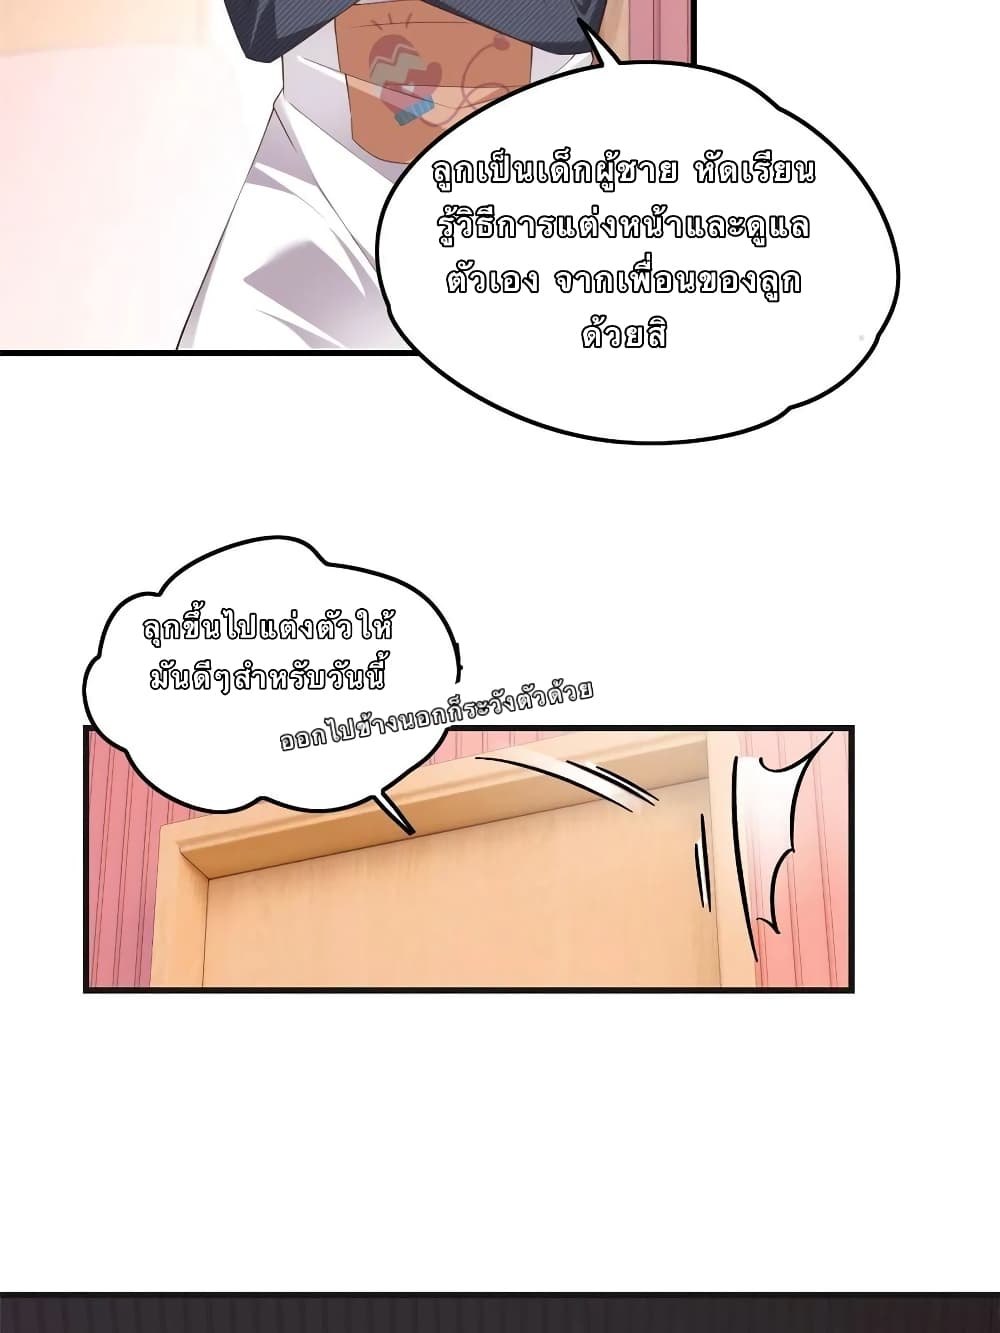 I Eat Soft Rice in Another World ตอนที่ 1